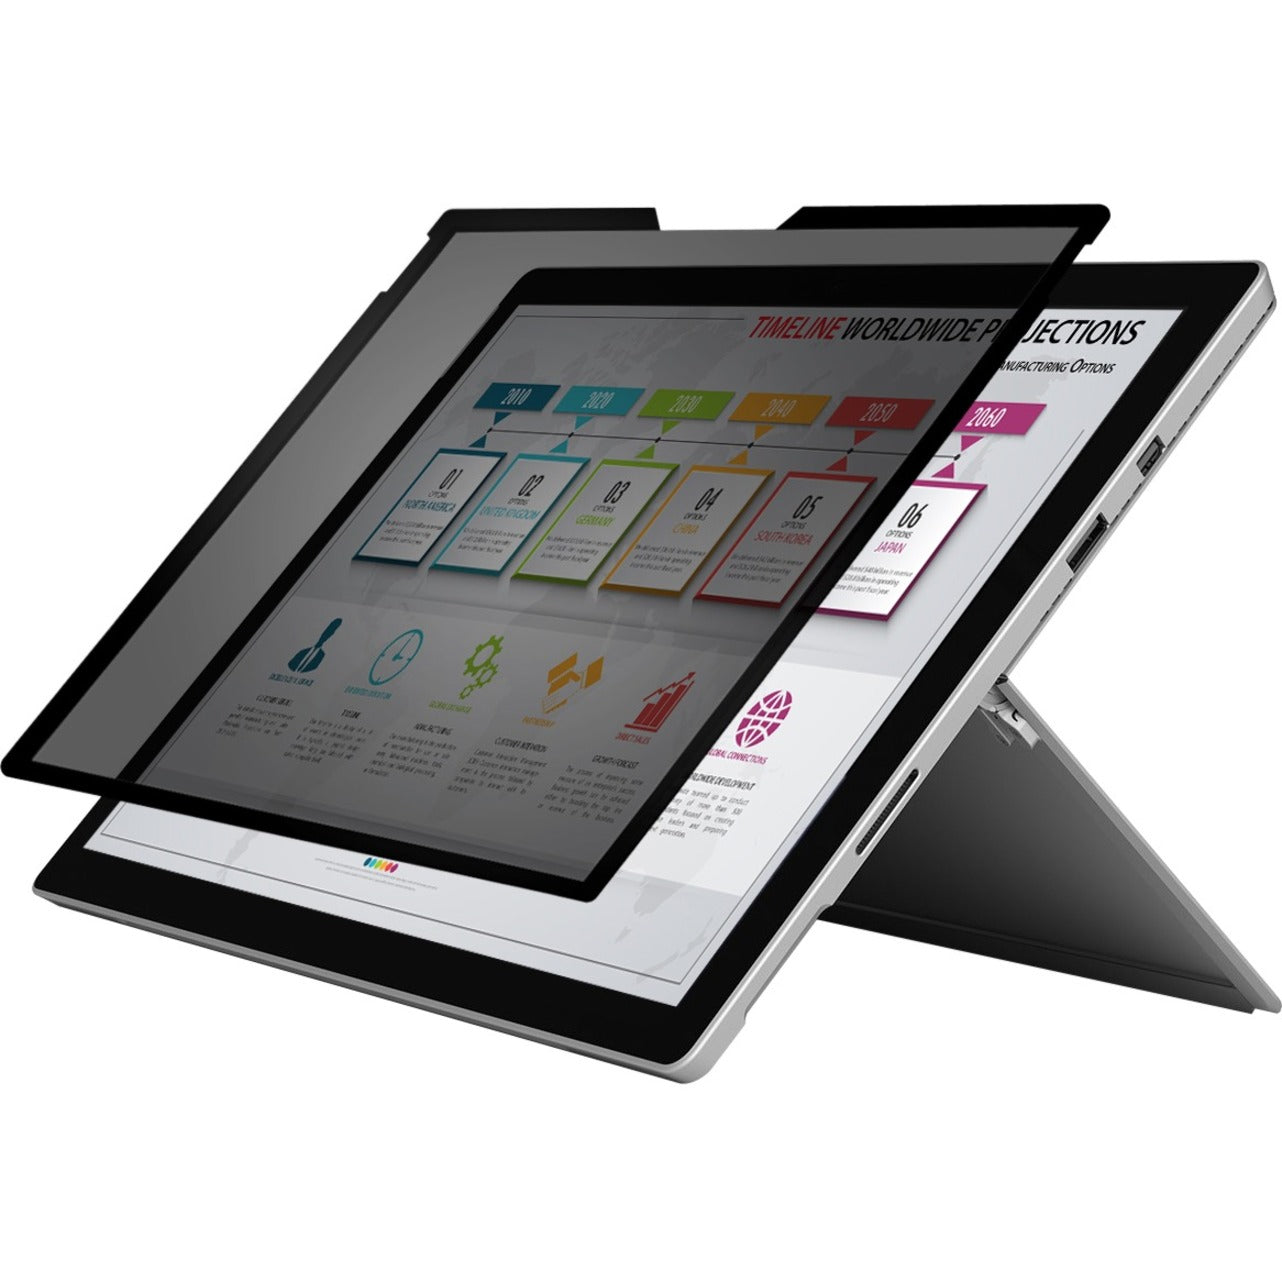 Rocstor PV00019-B1 Privacyview Privacy Screen Filter, Magnetic, Touch Sensitive, 12.3" Tablet PC